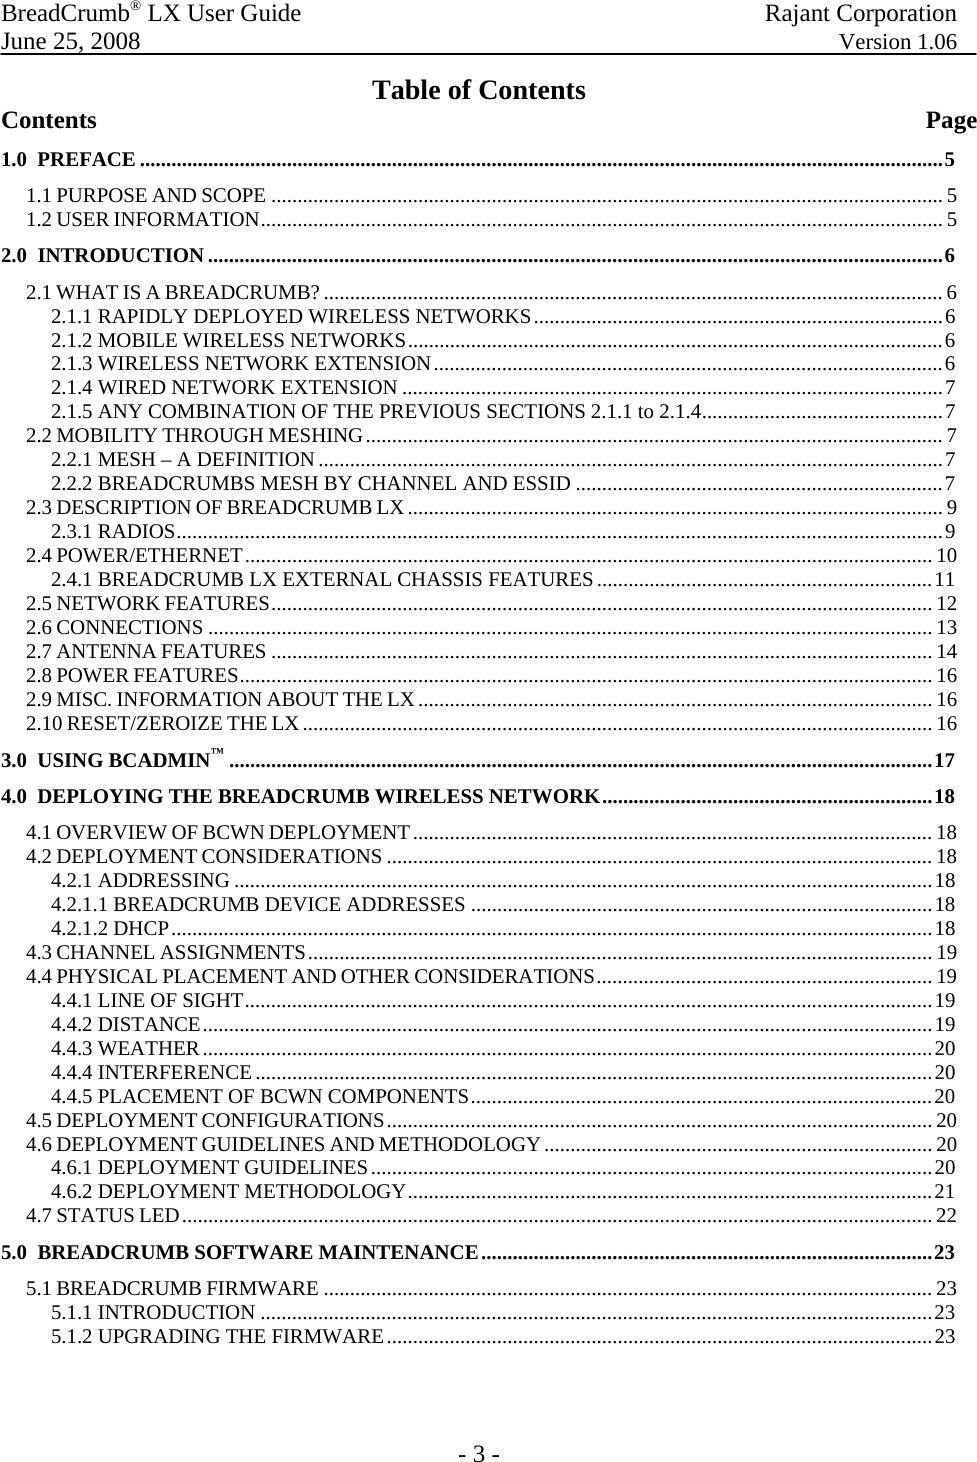 BreadCrumb® LX User Guide  Rajant Corporation  June 25, 2008  Version 1.06 - 3 - Table of Contents Contents                          Page 1.0  PREFACE .........................................................................................................................................................5 1.1 PURPOSE AND SCOPE ................................................................................................................................ 5 1.2 USER INFORMATION.................................................................................................................................. 5 2.0  INTRODUCTION ............................................................................................................................................6 2.1 WHAT IS A BREADCRUMB? ...................................................................................................................... 6 2.1.1 RAPIDLY DEPLOYED WIRELESS NETWORKS..............................................................................6 2.1.2 MOBILE WIRELESS NETWORKS......................................................................................................6 2.1.3 WIRELESS NETWORK EXTENSION.................................................................................................6 2.1.4 WIRED NETWORK EXTENSION .......................................................................................................7 2.1.5 ANY COMBINATION OF THE PREVIOUS SECTIONS 2.1.1 to 2.1.4..............................................7 2.2 MOBILITY THROUGH MESHING.............................................................................................................. 7 2.2.1 MESH – A DEFINITION.......................................................................................................................7 2.2.2 BREADCRUMBS MESH BY CHANNEL AND ESSID ......................................................................7 2.3 DESCRIPTION OF BREADCRUMB LX...................................................................................................... 9 2.3.1 RADIOS..................................................................................................................................................9 2.4 POWER/ETHERNET................................................................................................................................... 10 2.4.1 BREADCRUMB LX EXTERNAL CHASSIS FEATURES................................................................11 2.5 NETWORK FEATURES.............................................................................................................................. 12 2.6 CONNECTIONS .......................................................................................................................................... 13 2.7 ANTENNA FEATURES .............................................................................................................................. 14 2.8 POWER FEATURES.................................................................................................................................... 16 2.9 MISC. INFORMATION ABOUT THE LX.................................................................................................. 16 2.10 RESET/ZEROIZE THE LX........................................................................................................................ 16 3.0  USING BCADMIN™......................................................................................................................................17 4.0  DEPLOYING THE BREADCRUMB WIRELESS NETWORK...............................................................18 4.1 OVERVIEW OF BCWN DEPLOYMENT................................................................................................... 18 4.2 DEPLOYMENT CONSIDERATIONS ........................................................................................................ 18 4.2.1 ADDRESSING .....................................................................................................................................18 4.2.1.1 BREADCRUMB DEVICE ADDRESSES ........................................................................................18 4.2.1.2 DHCP.................................................................................................................................................18 4.3 CHANNEL ASSIGNMENTS....................................................................................................................... 19 4.4 PHYSICAL PLACEMENT AND OTHER CONSIDERATIONS................................................................ 19 4.4.1 LINE OF SIGHT...................................................................................................................................19 4.4.2 DISTANCE...........................................................................................................................................19 4.4.3 WEATHER...........................................................................................................................................20 4.4.4 INTERFERENCE .................................................................................................................................20 4.4.5 PLACEMENT OF BCWN COMPONENTS........................................................................................20 4.5 DEPLOYMENT CONFIGURATIONS........................................................................................................ 20 4.6 DEPLOYMENT GUIDELINES AND METHODOLOGY.......................................................................... 20 4.6.1 DEPLOYMENT GUIDELINES...........................................................................................................20 4.6.2 DEPLOYMENT METHODOLOGY....................................................................................................21 4.7 STATUS LED............................................................................................................................................... 22 5.0  BREADCRUMB SOFTWARE MAINTENANCE......................................................................................23 5.1 BREADCRUMB FIRMWARE .................................................................................................................... 23 5.1.1 INTRODUCTION ................................................................................................................................23 5.1.2 UPGRADING THE FIRMWARE........................................................................................................23   